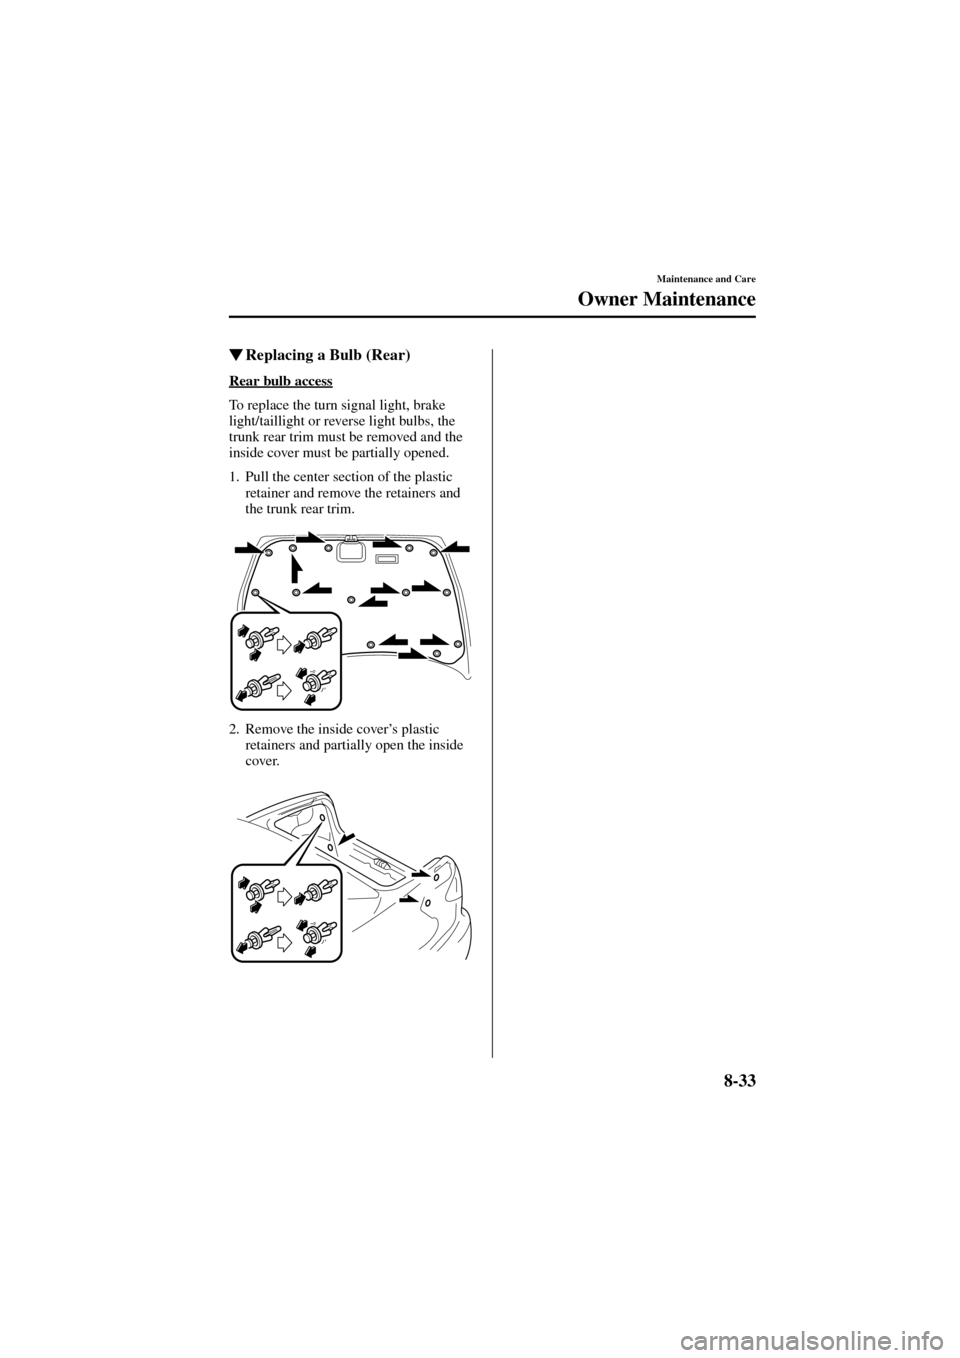 MAZDA MODEL 6 2004   (in English) Service Manual 8-33
Maintenance and Care
Owner Maintenance
Form No. 8R29-EA-02I
Replacing a Bulb (Rear)
Rear bulb access
To replace the turn signal light, brake 
light/taillight or reverse light bulbs, the 
trunk r